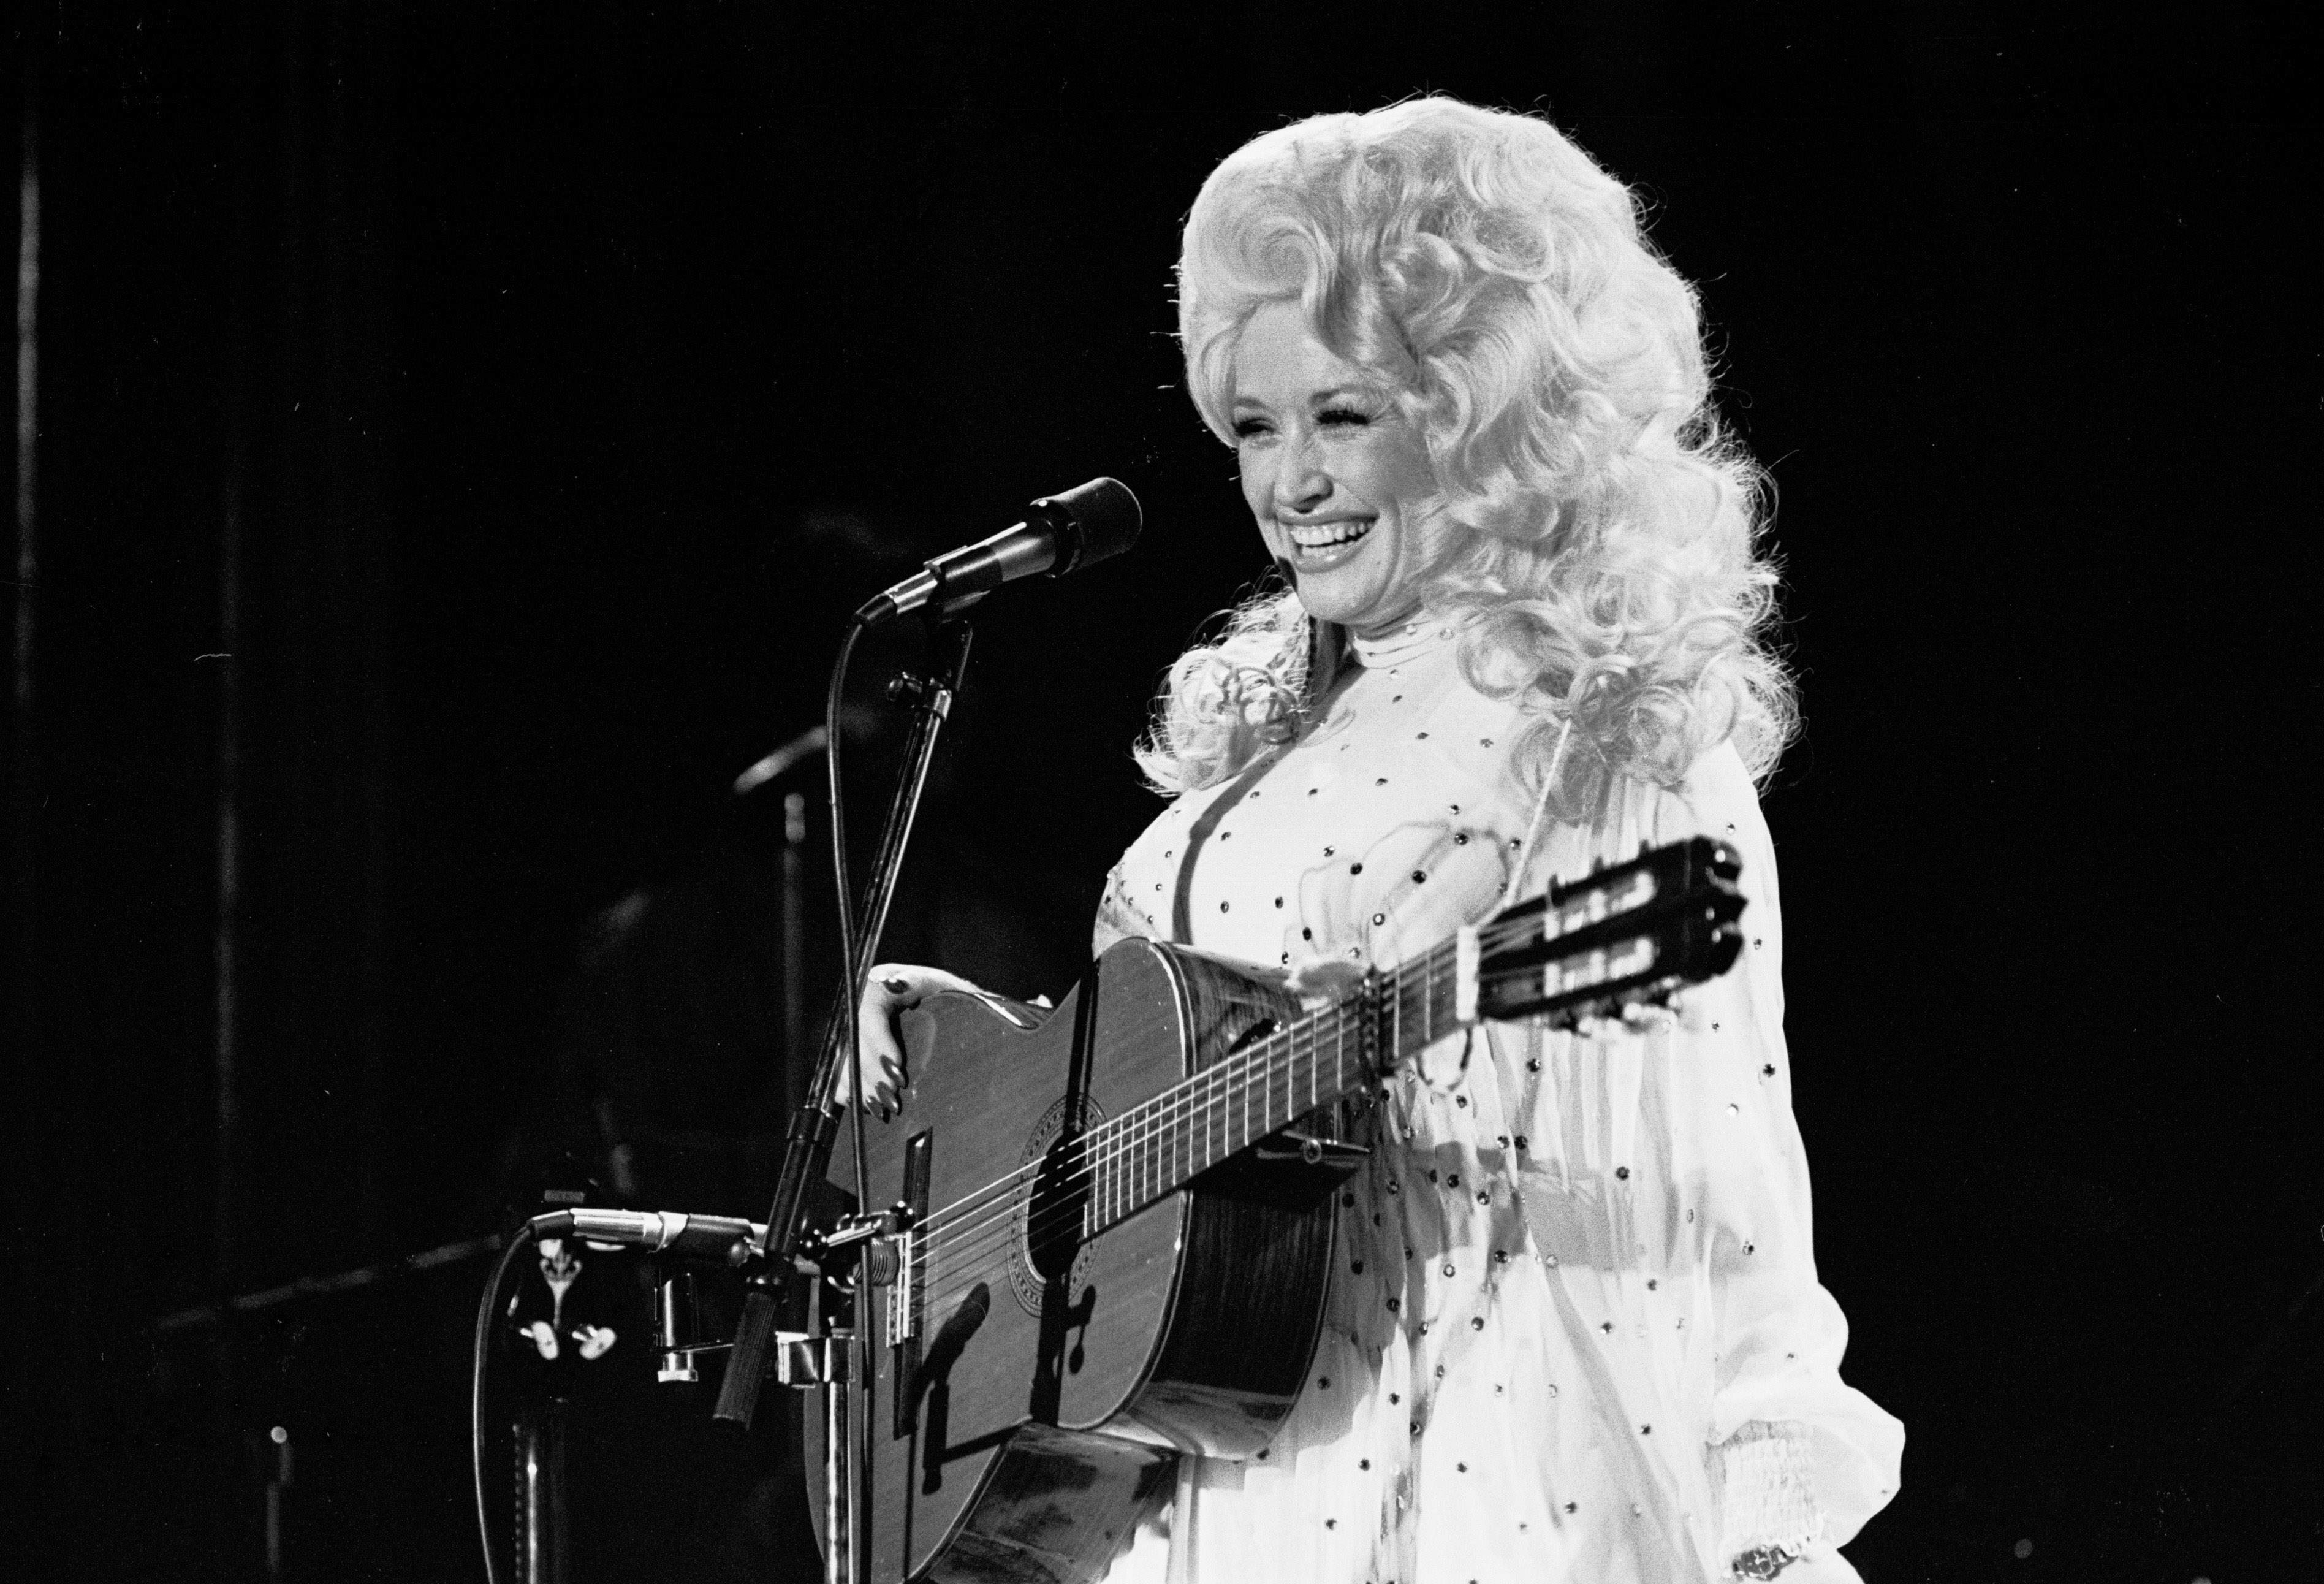 A black and white photo of Dolly Parton wearing a white shirt with rhinestones. She holds a guitar and stands in front of a microphone.